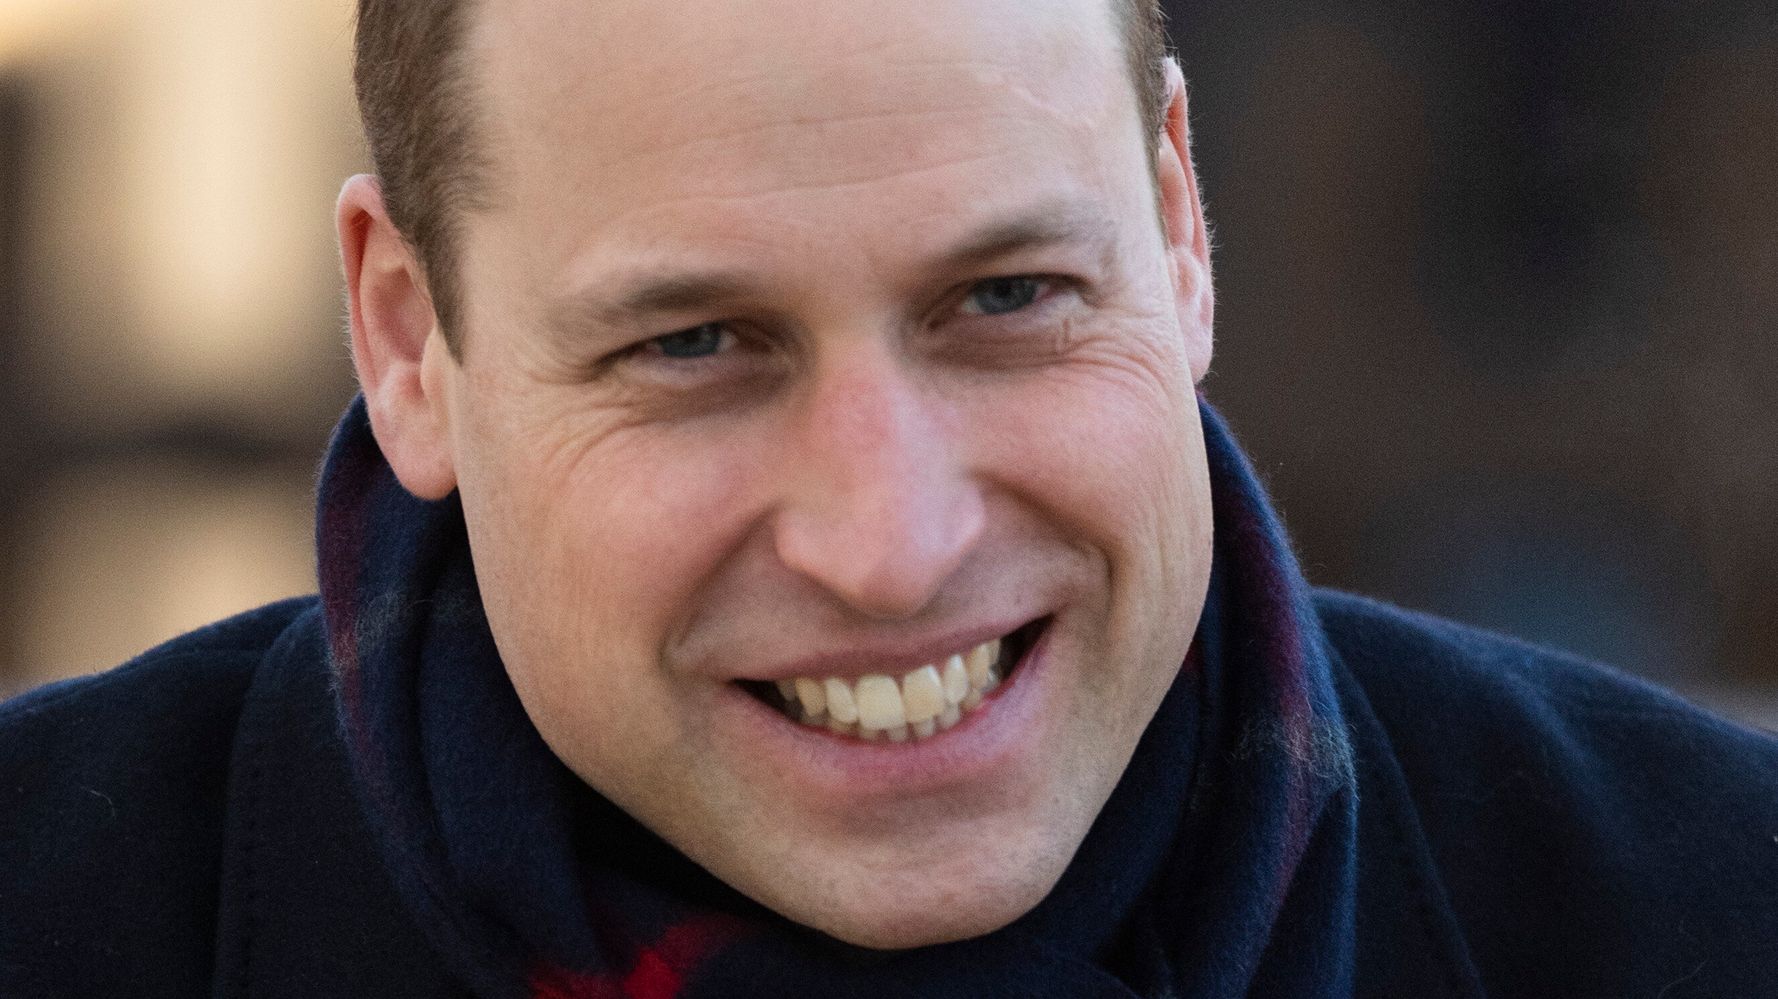 Twitter Users Are Obsessed With Prince William's Vaccination Gun Show